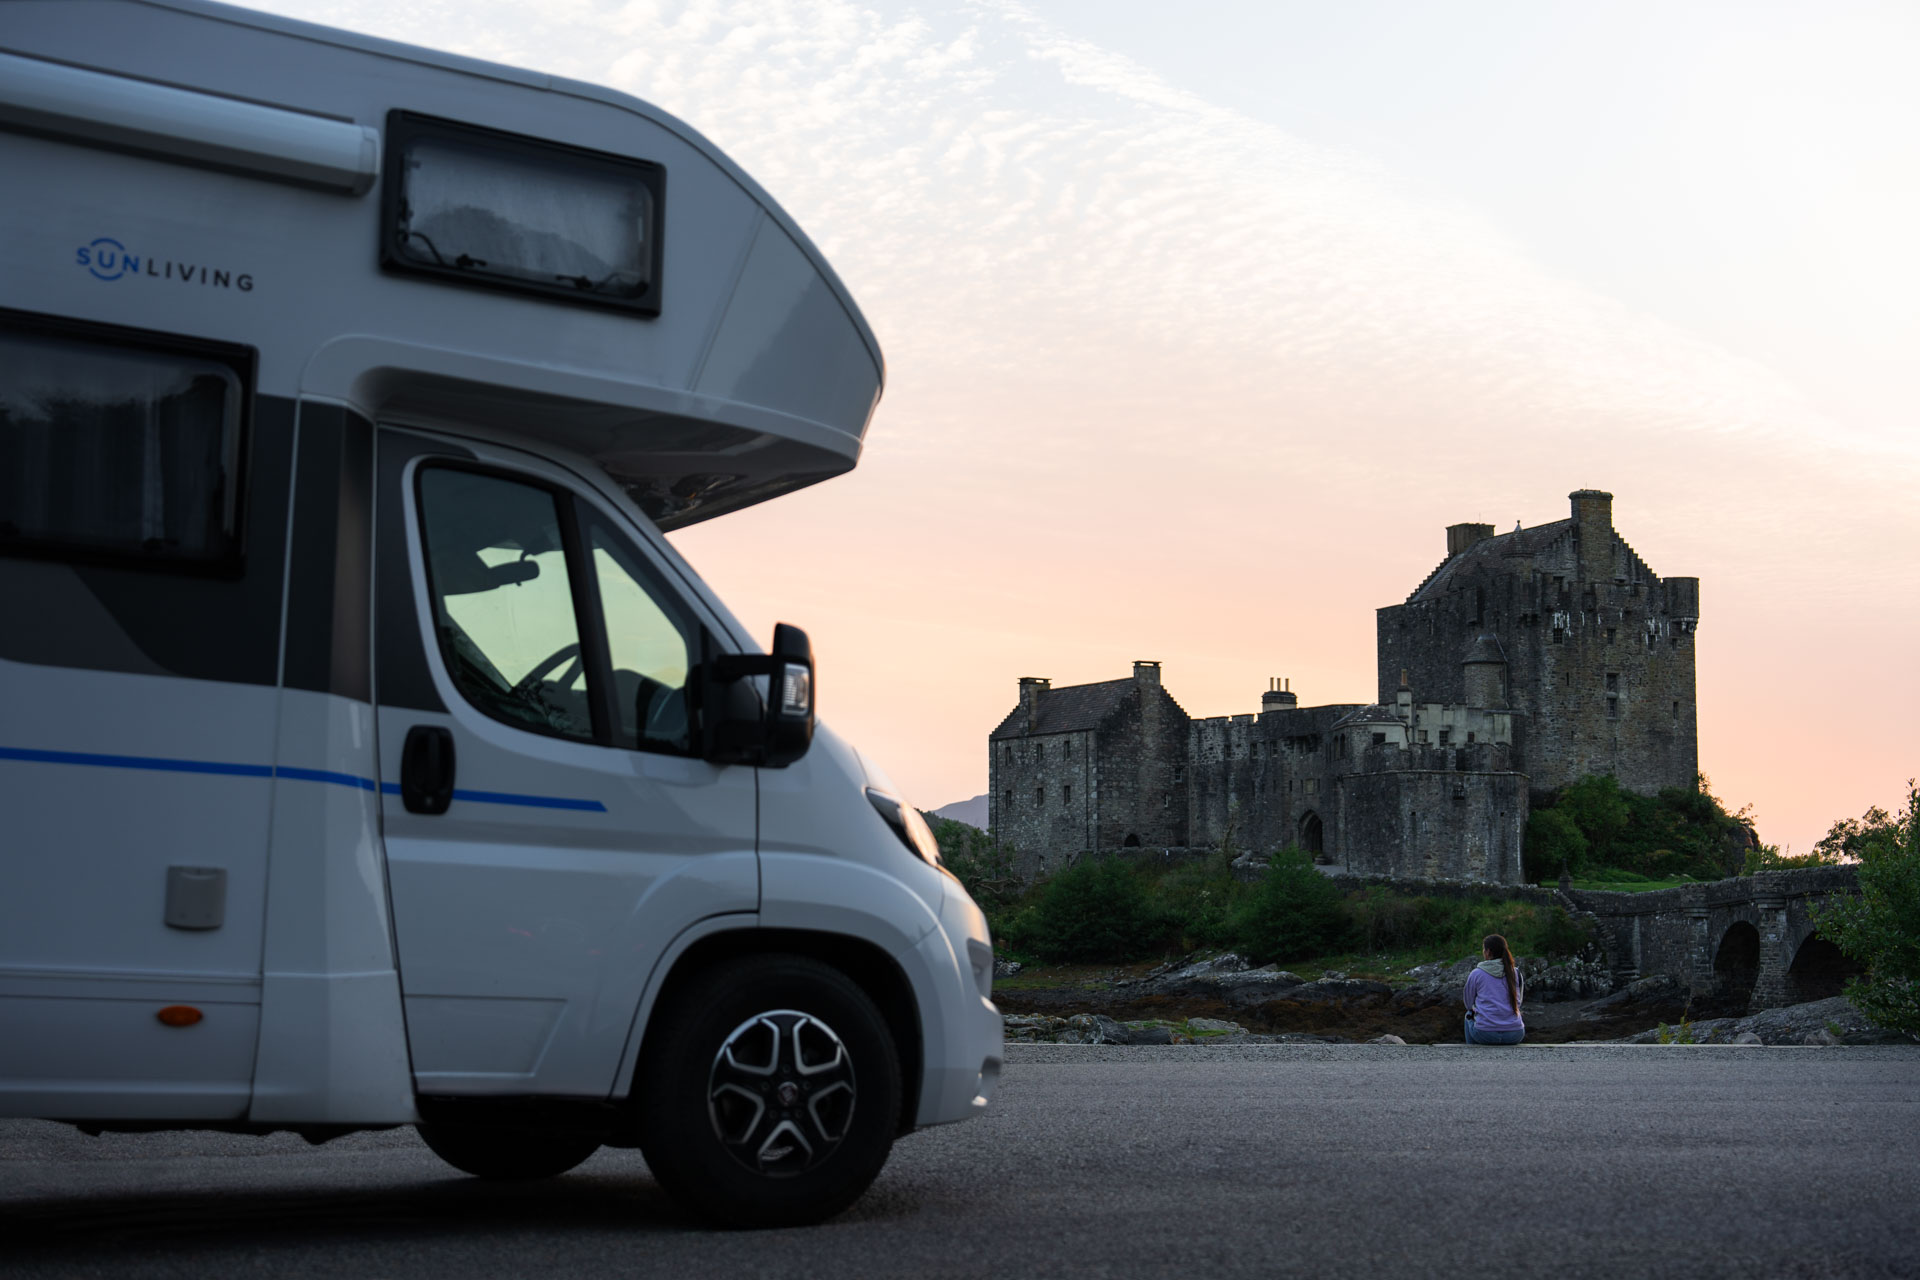 Sara sitting down on a wall enjoying the view of Eilean Donan Castle in Scotland besides a campervan.